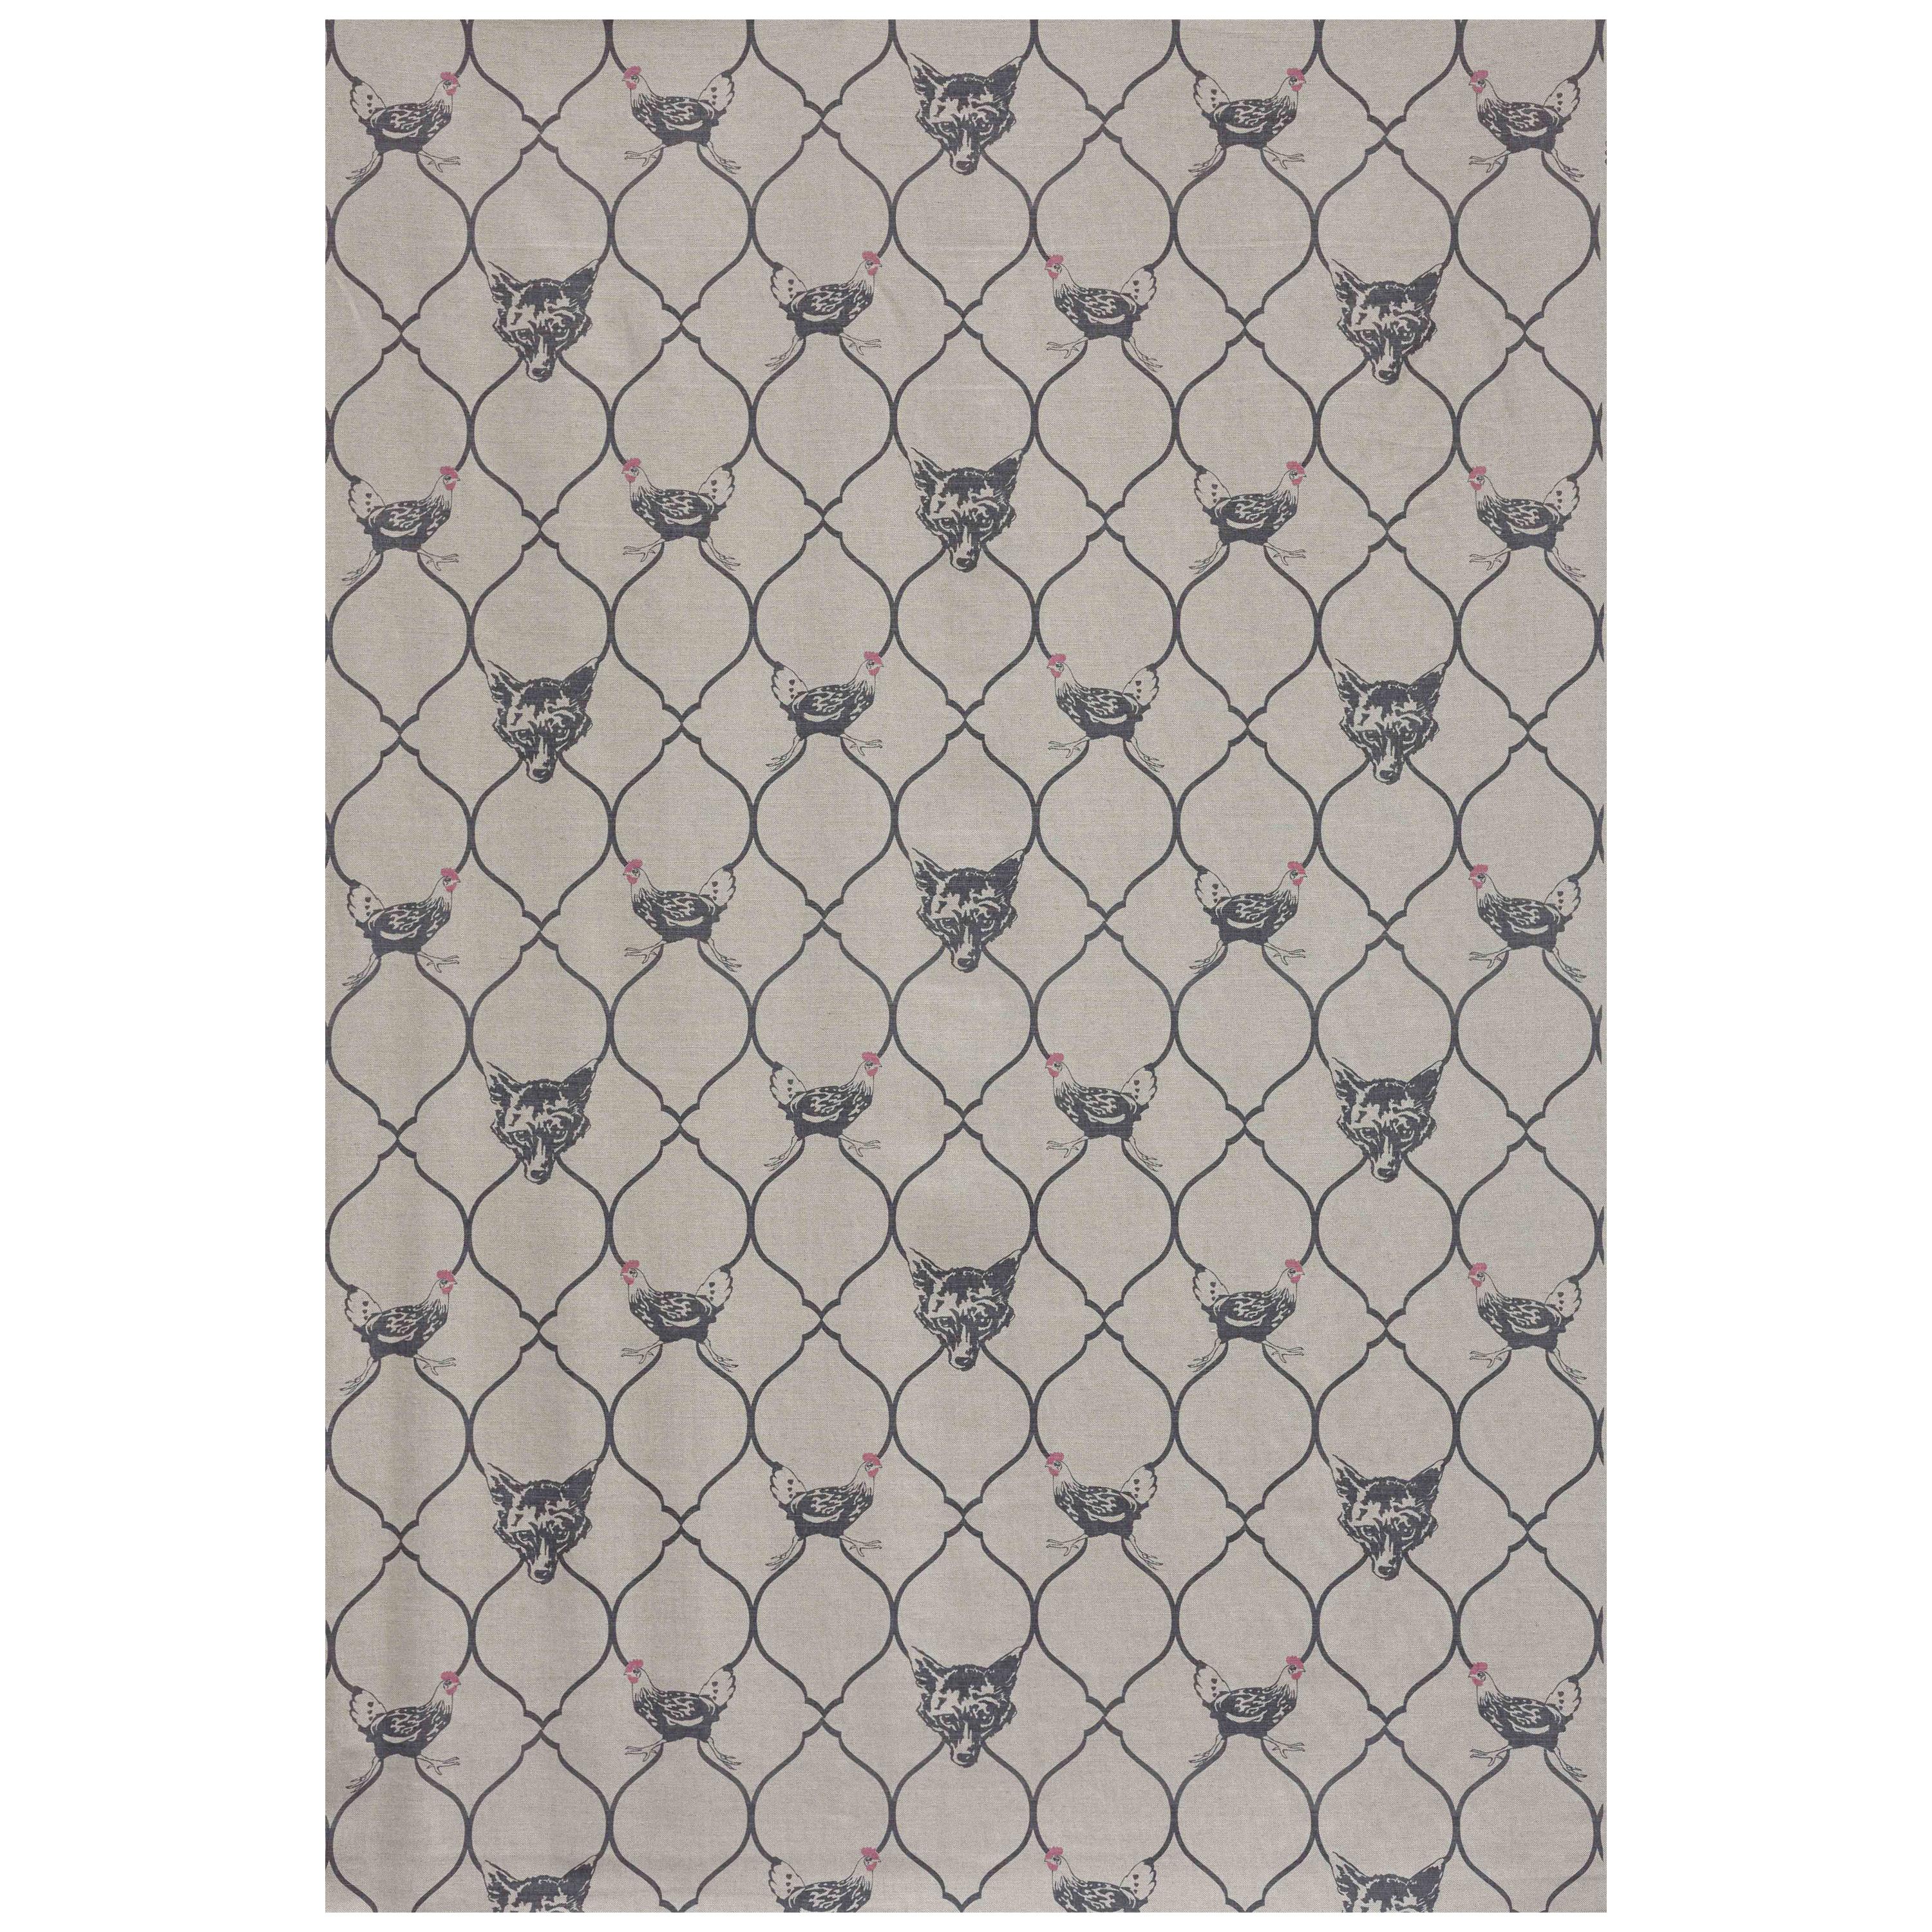 'Fox & Hen' Contemporary, Traditional Fabric in Charcoal/Pink on Natural For Sale